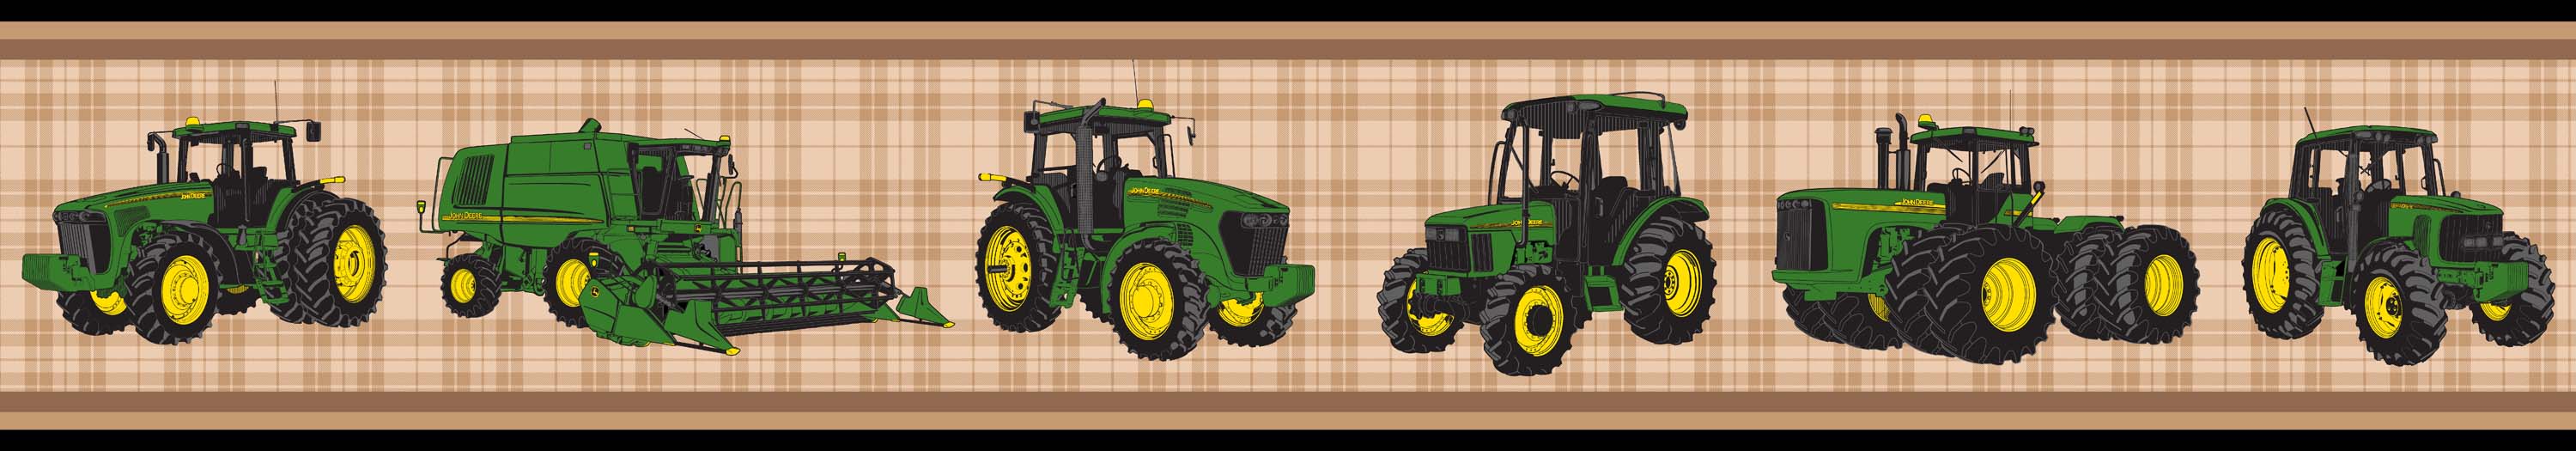 Product Res For John Deere Tractors And Plaid Wall Border